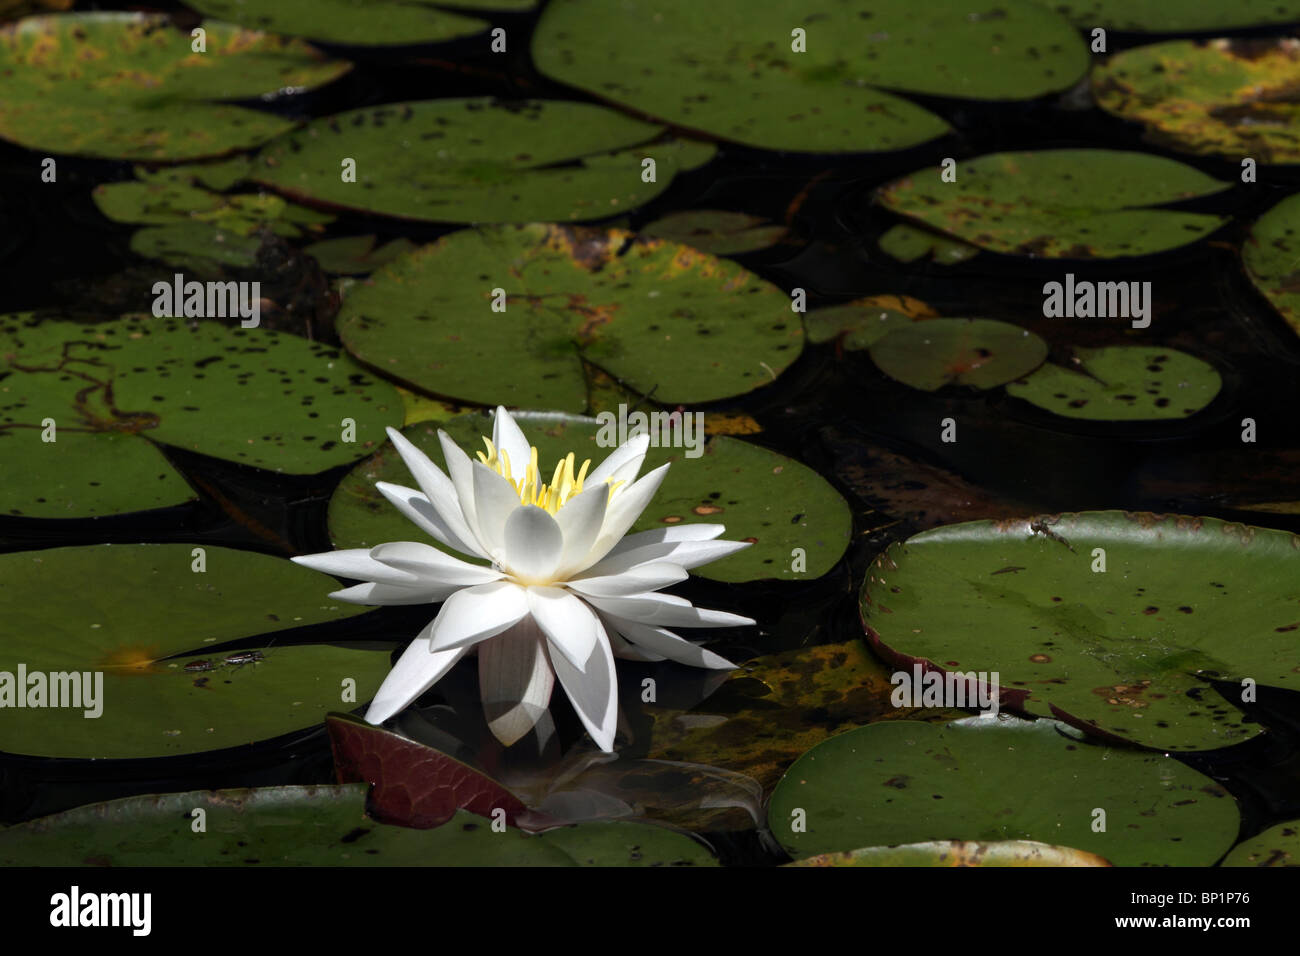 A Water Lily flower among lily pads. Leamings Run Gardens, Cape May Court House, New Jersey, USA Stock Photo